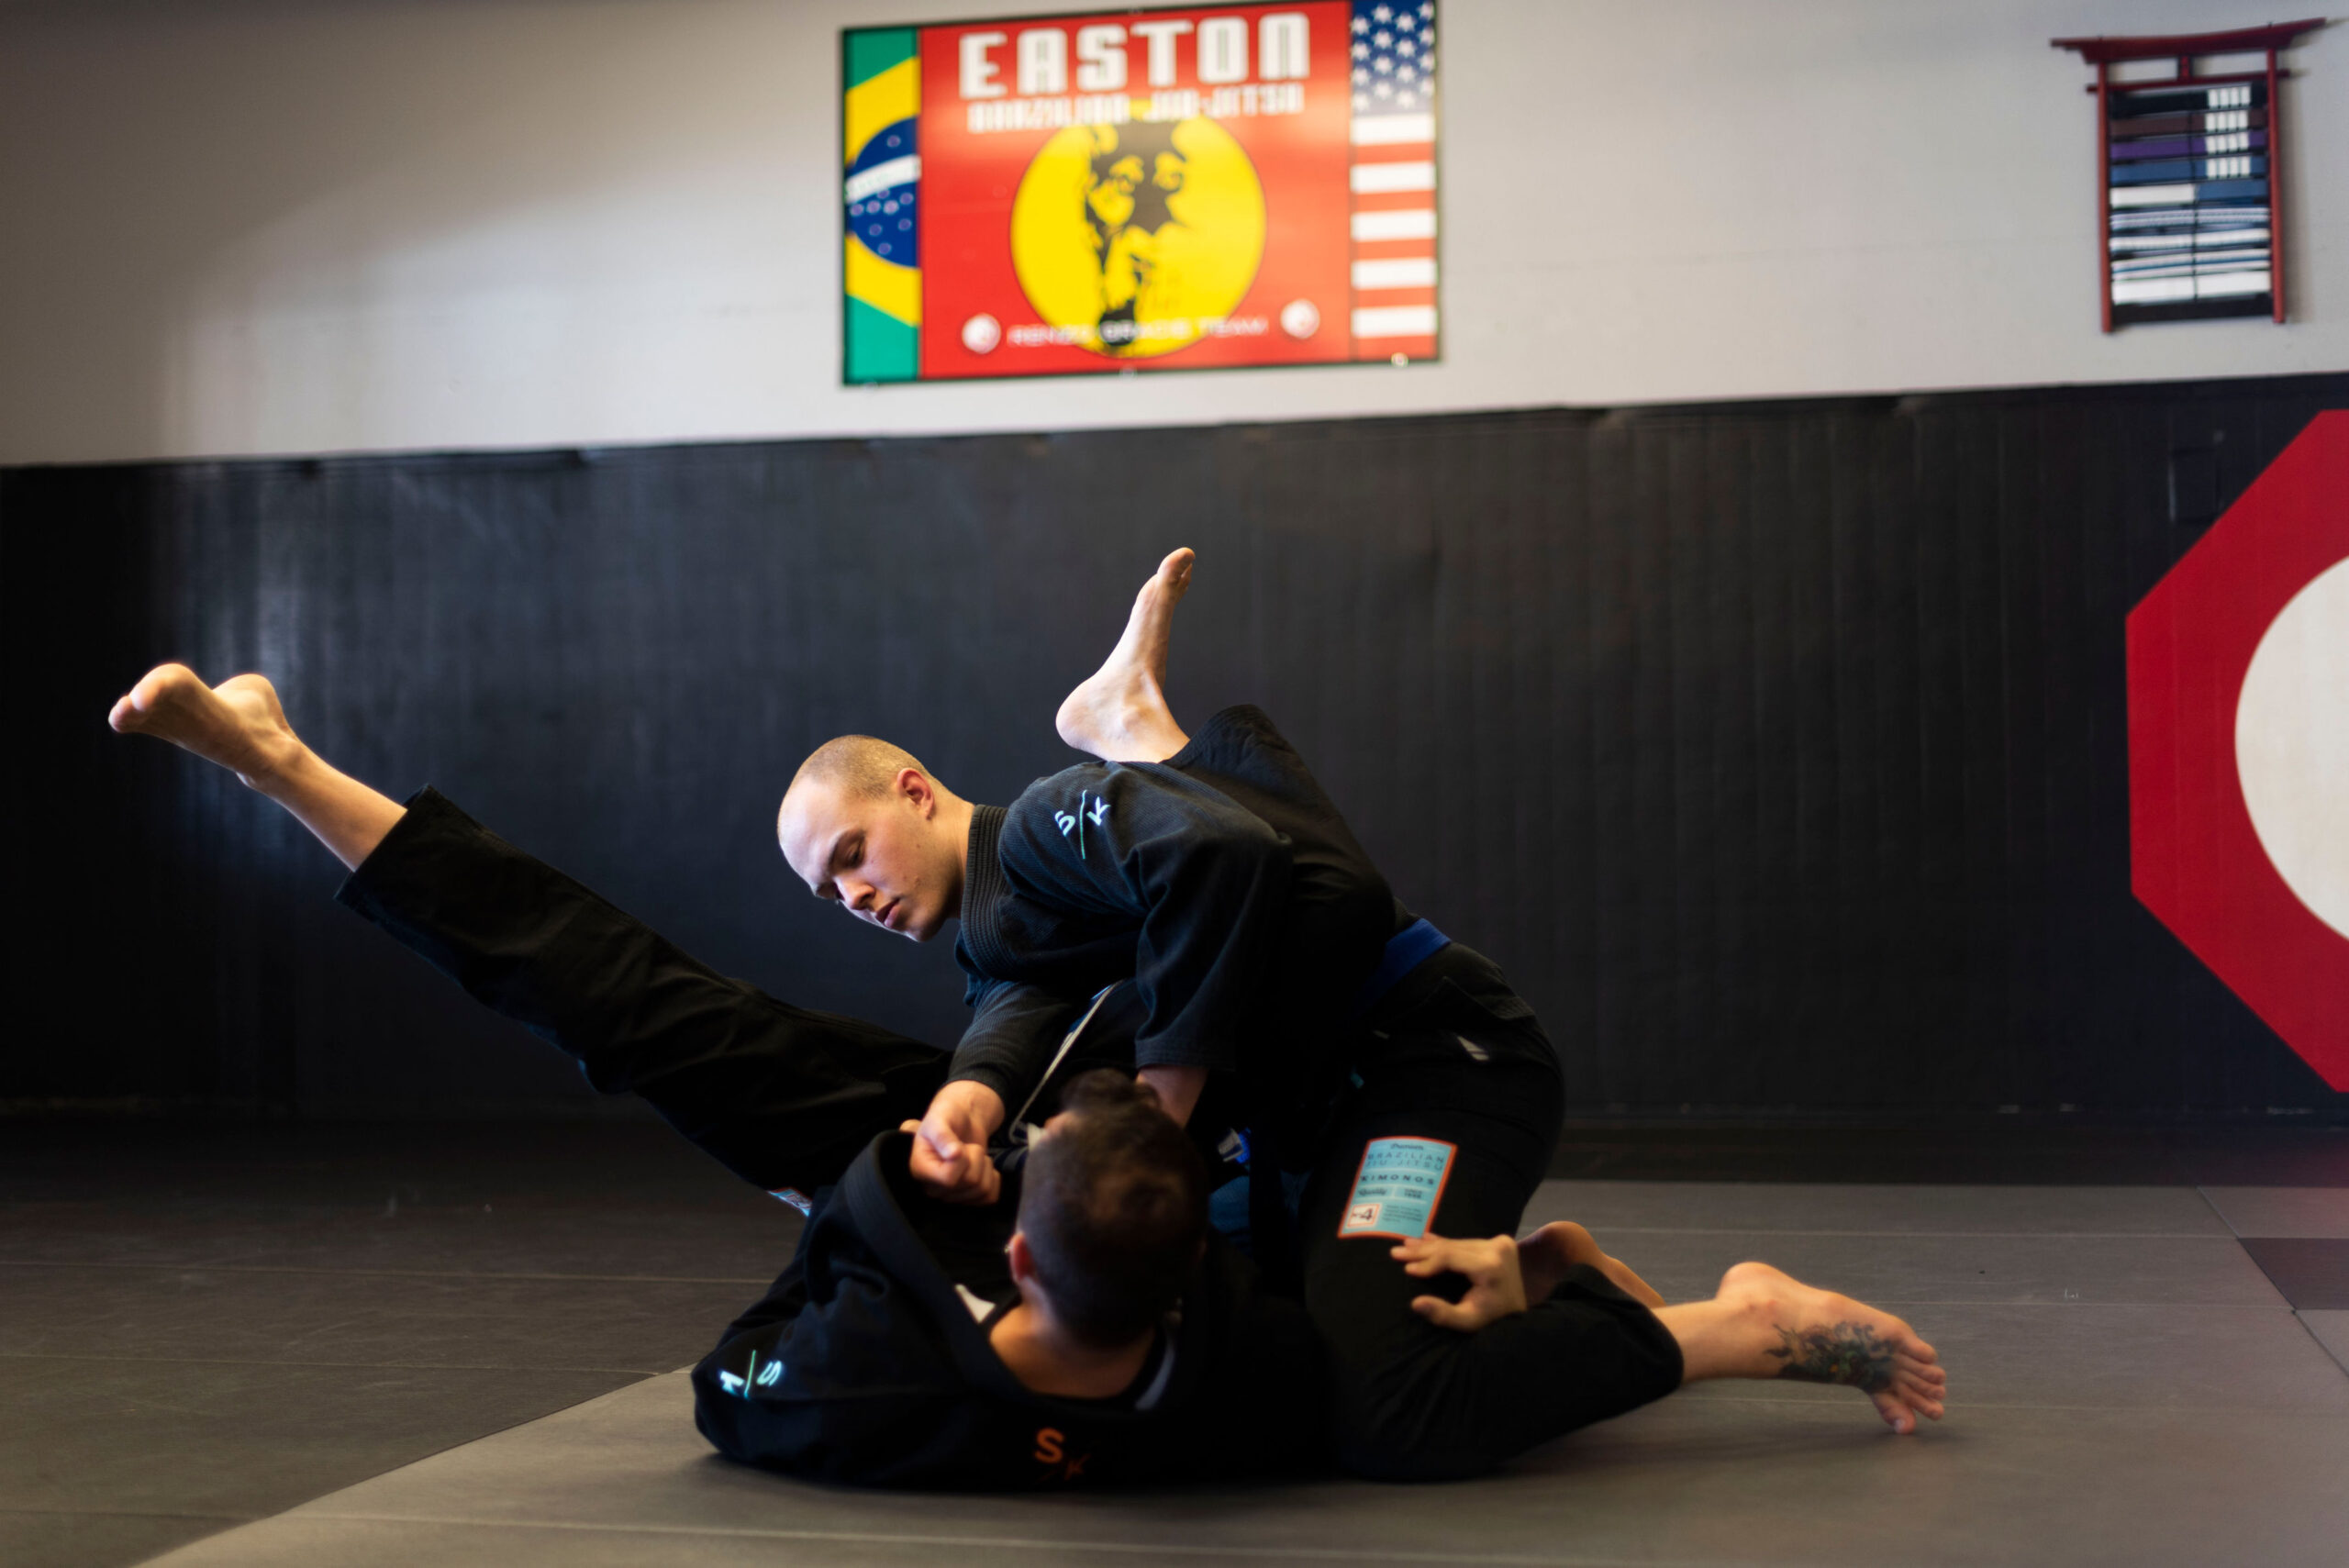 Back on the Mat: How One Jiu-Jitsu Student Found Easton Training Center and Grew Through the Pandemic